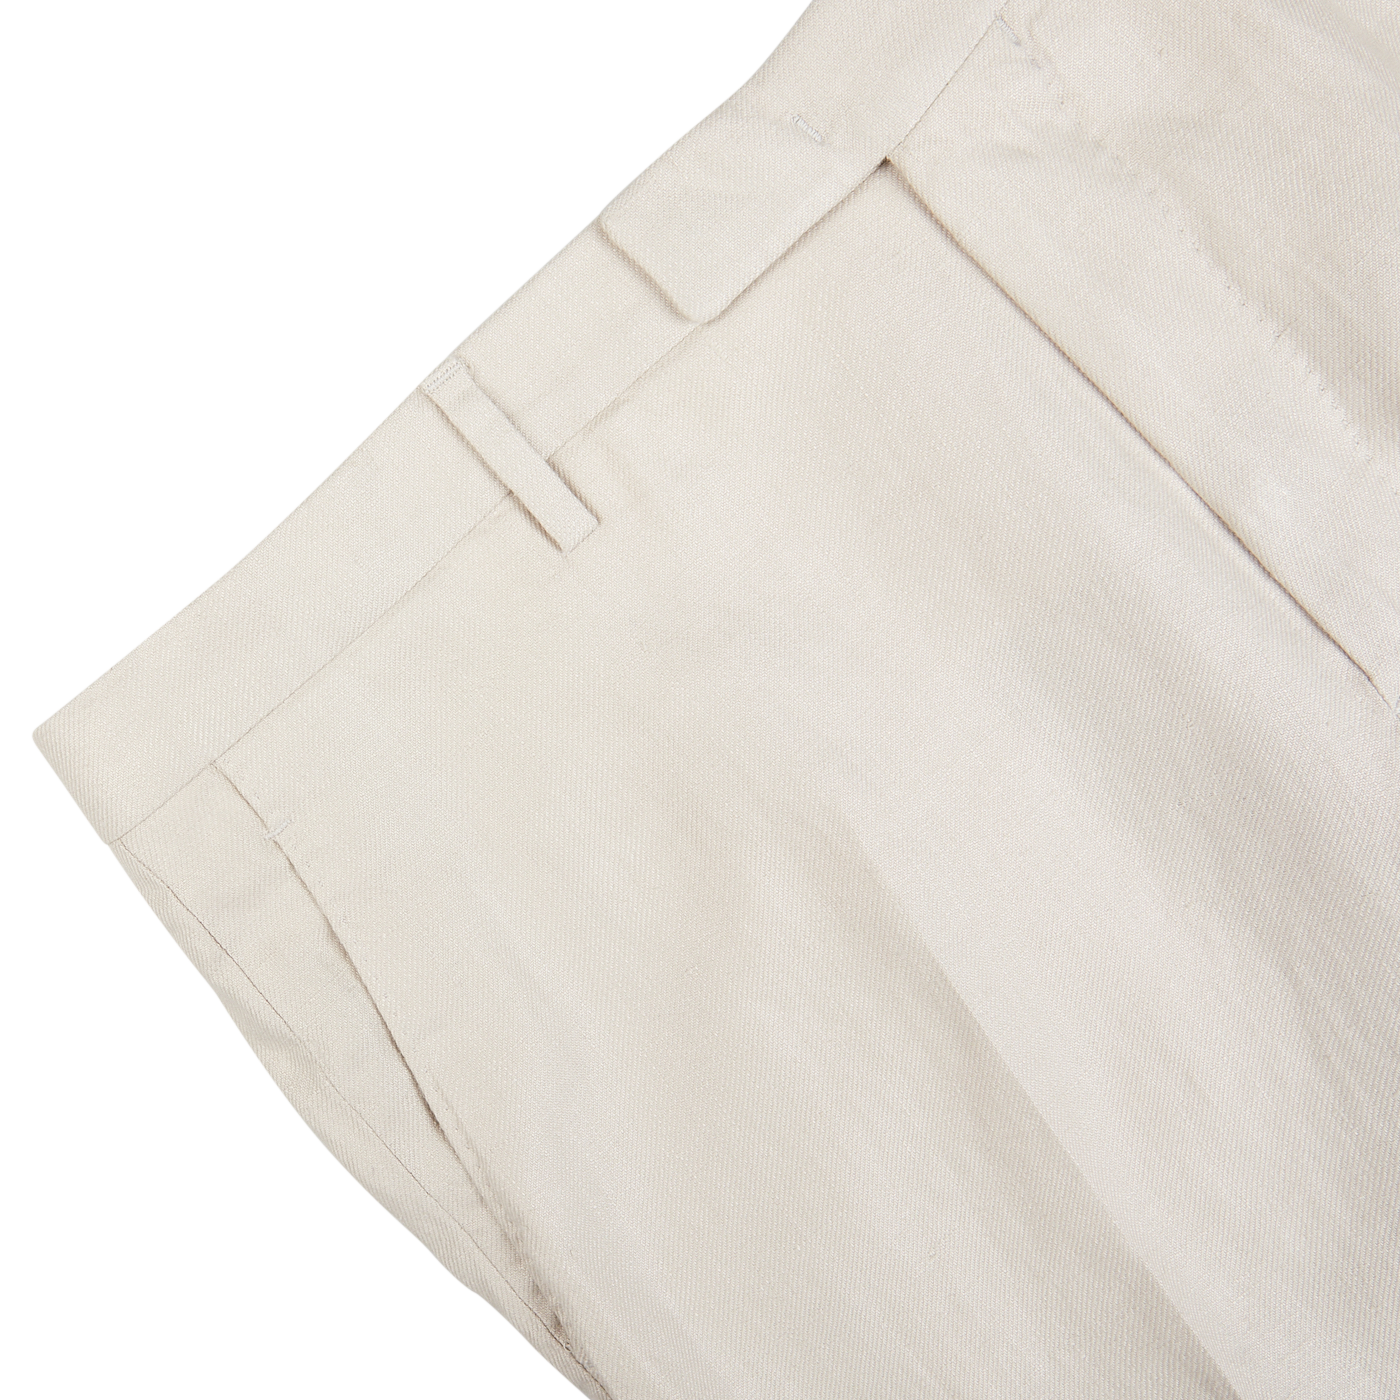 Close-up of a light beige Boglioli linen trouser waistband with a belt loop on a white background.